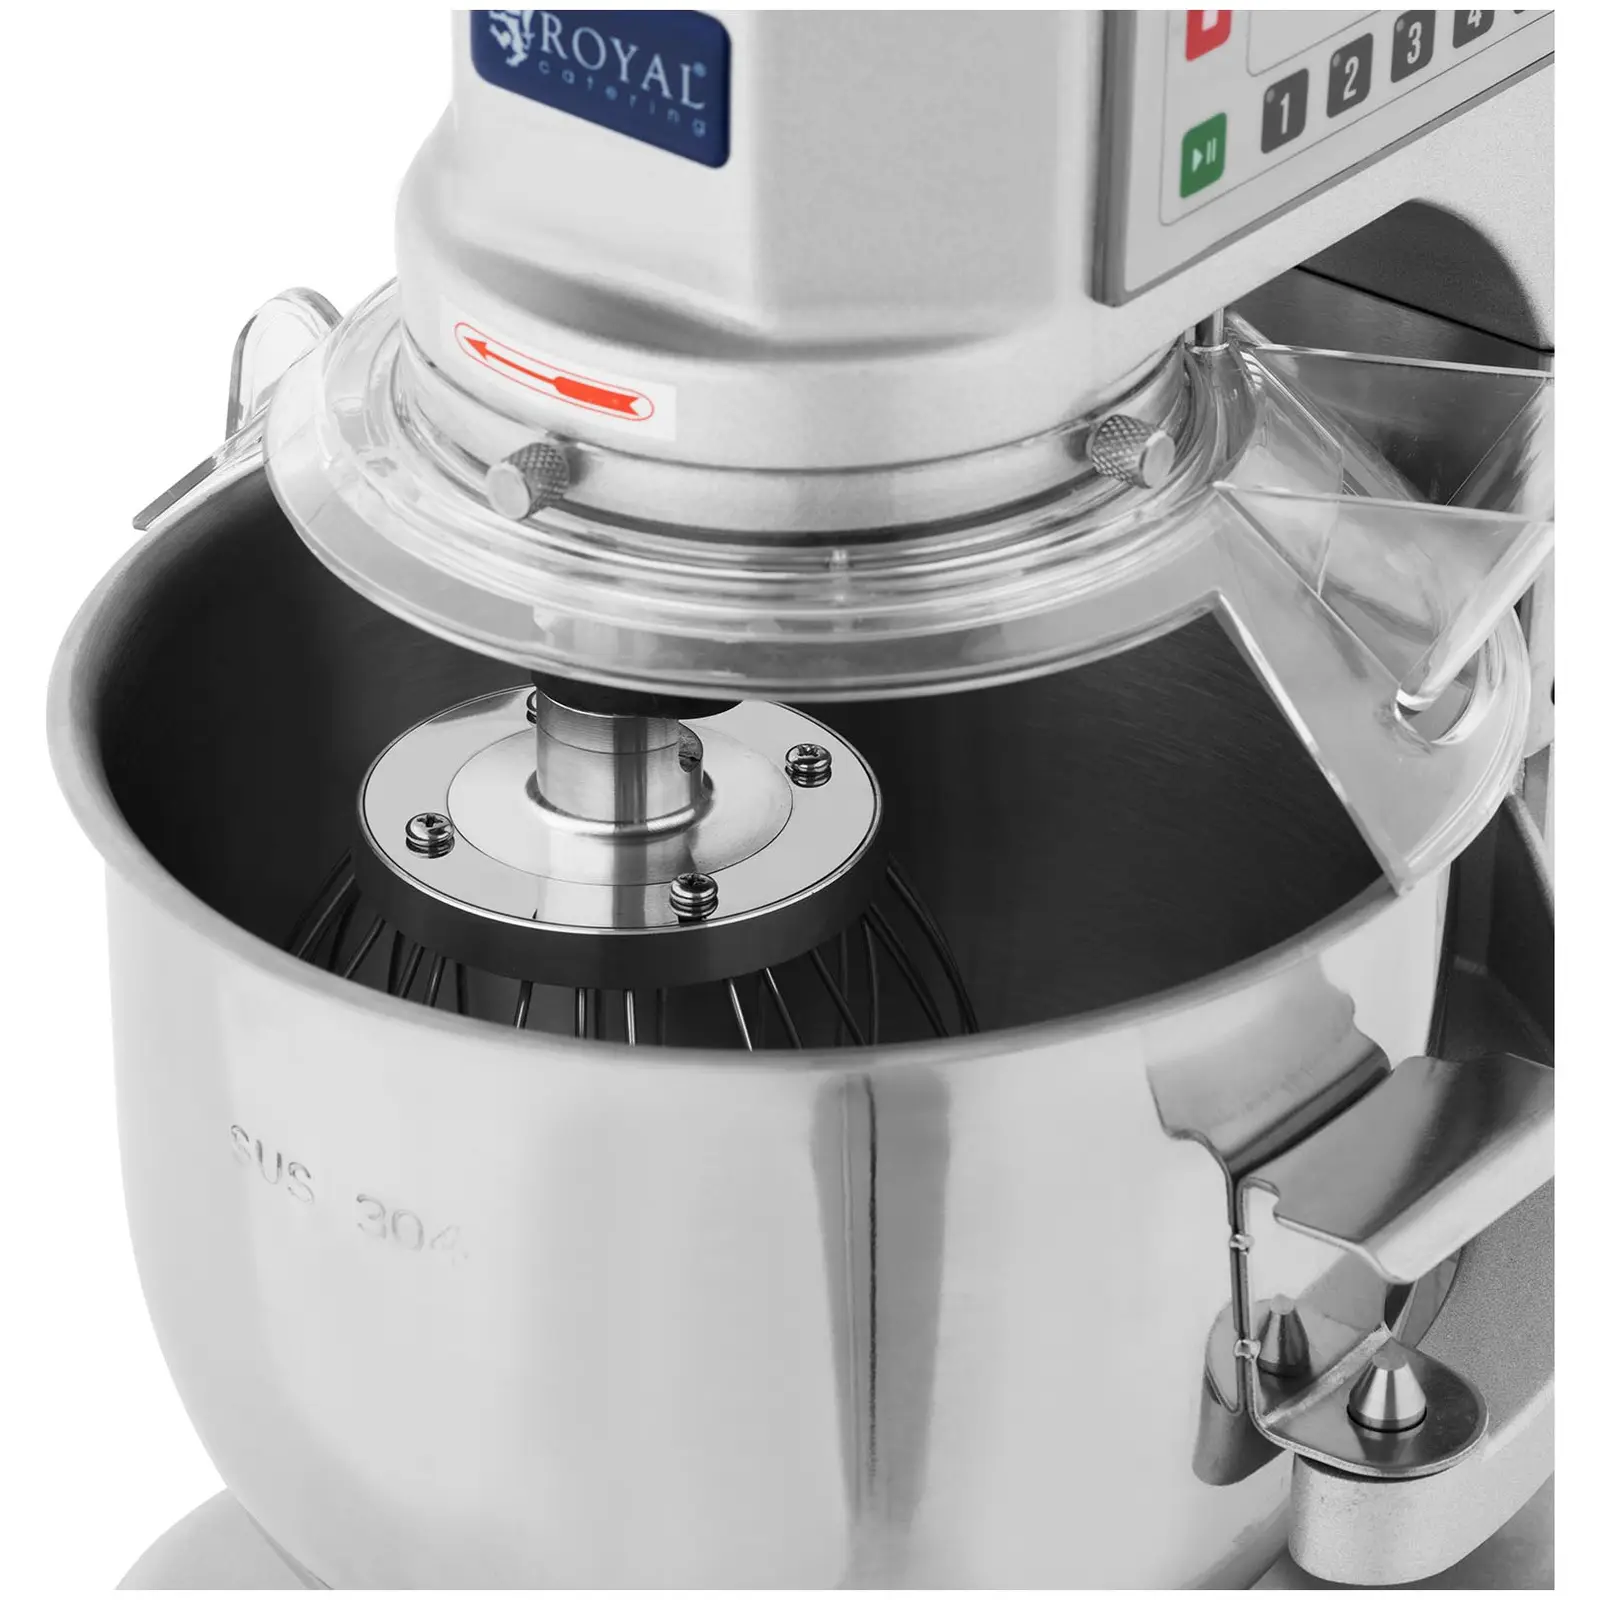 Amasadora - 650 W - Royal Catering - 230 - 580 rpm